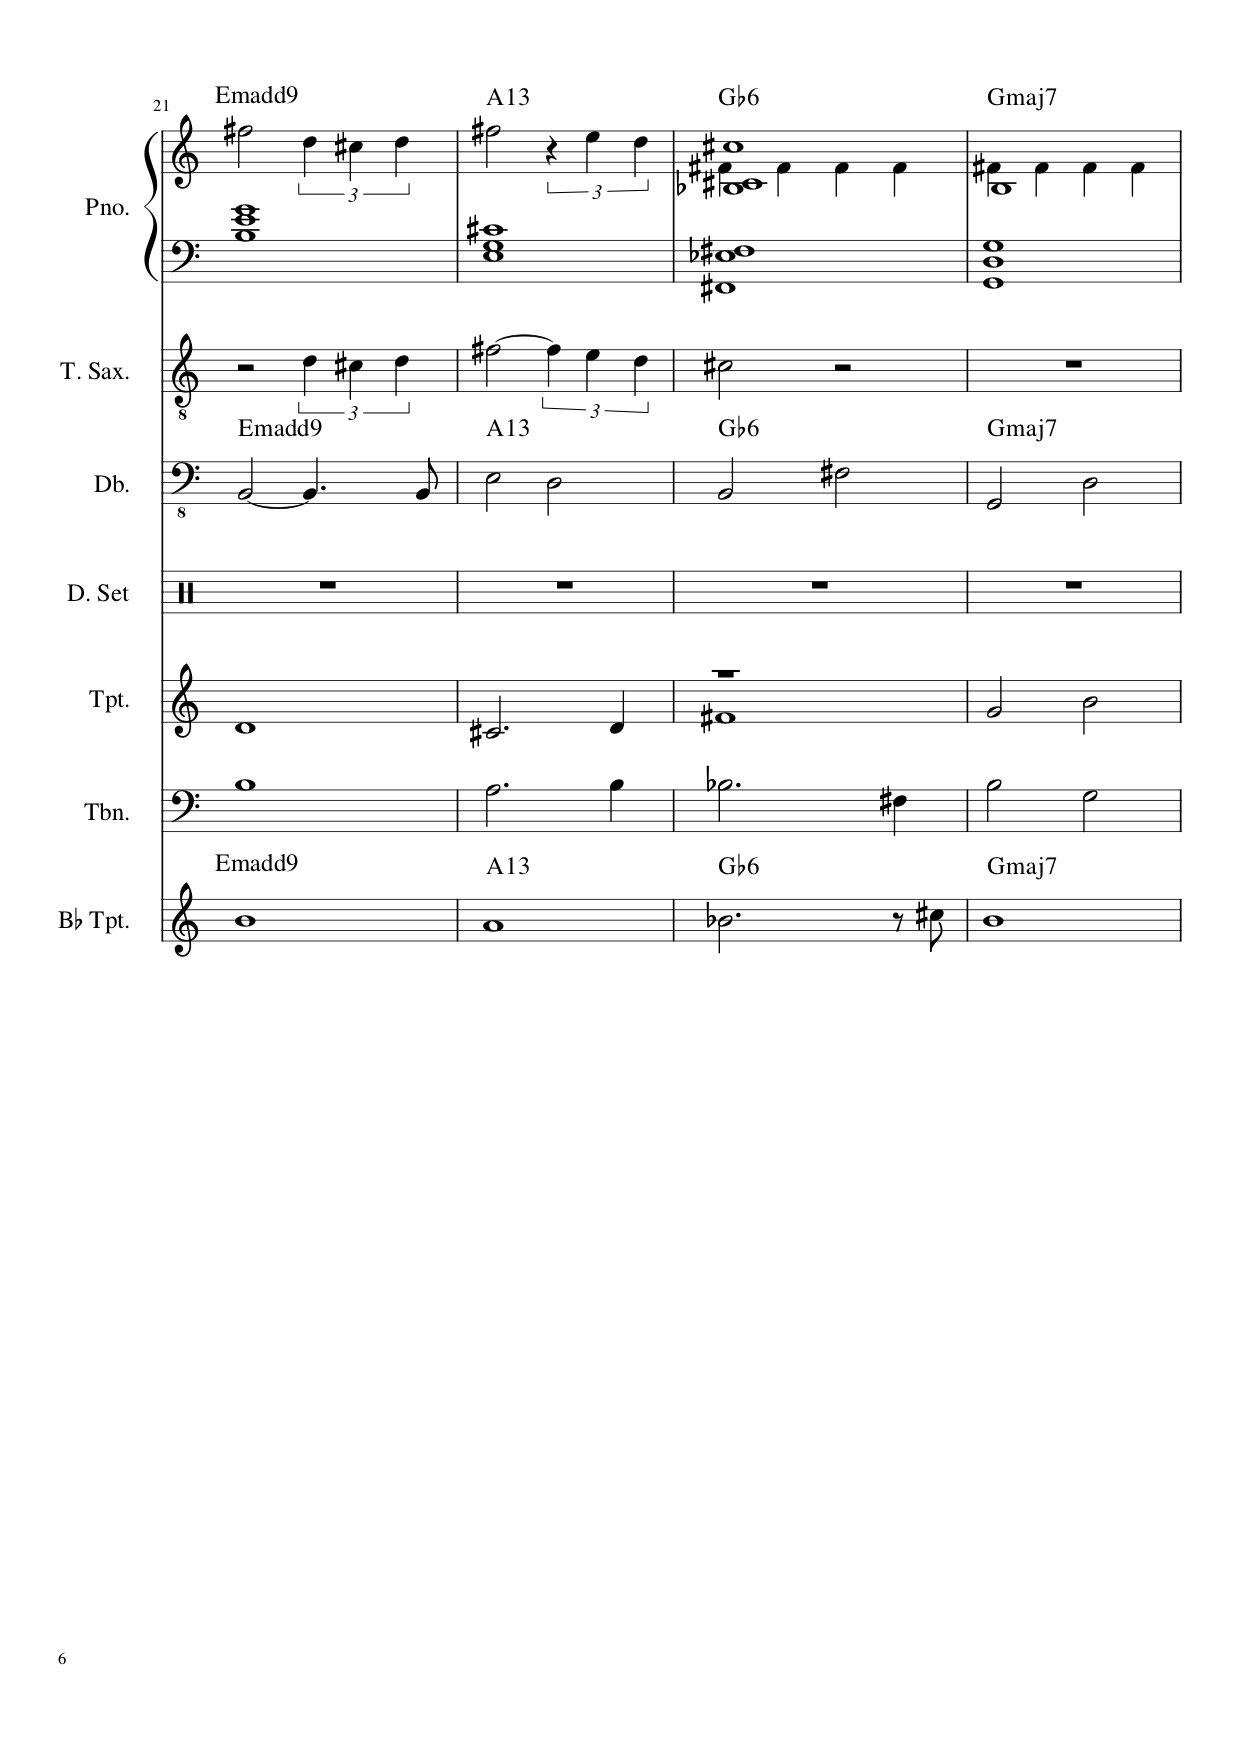 Steal Suffering Theme-Score_and_Parts pg6.jpg